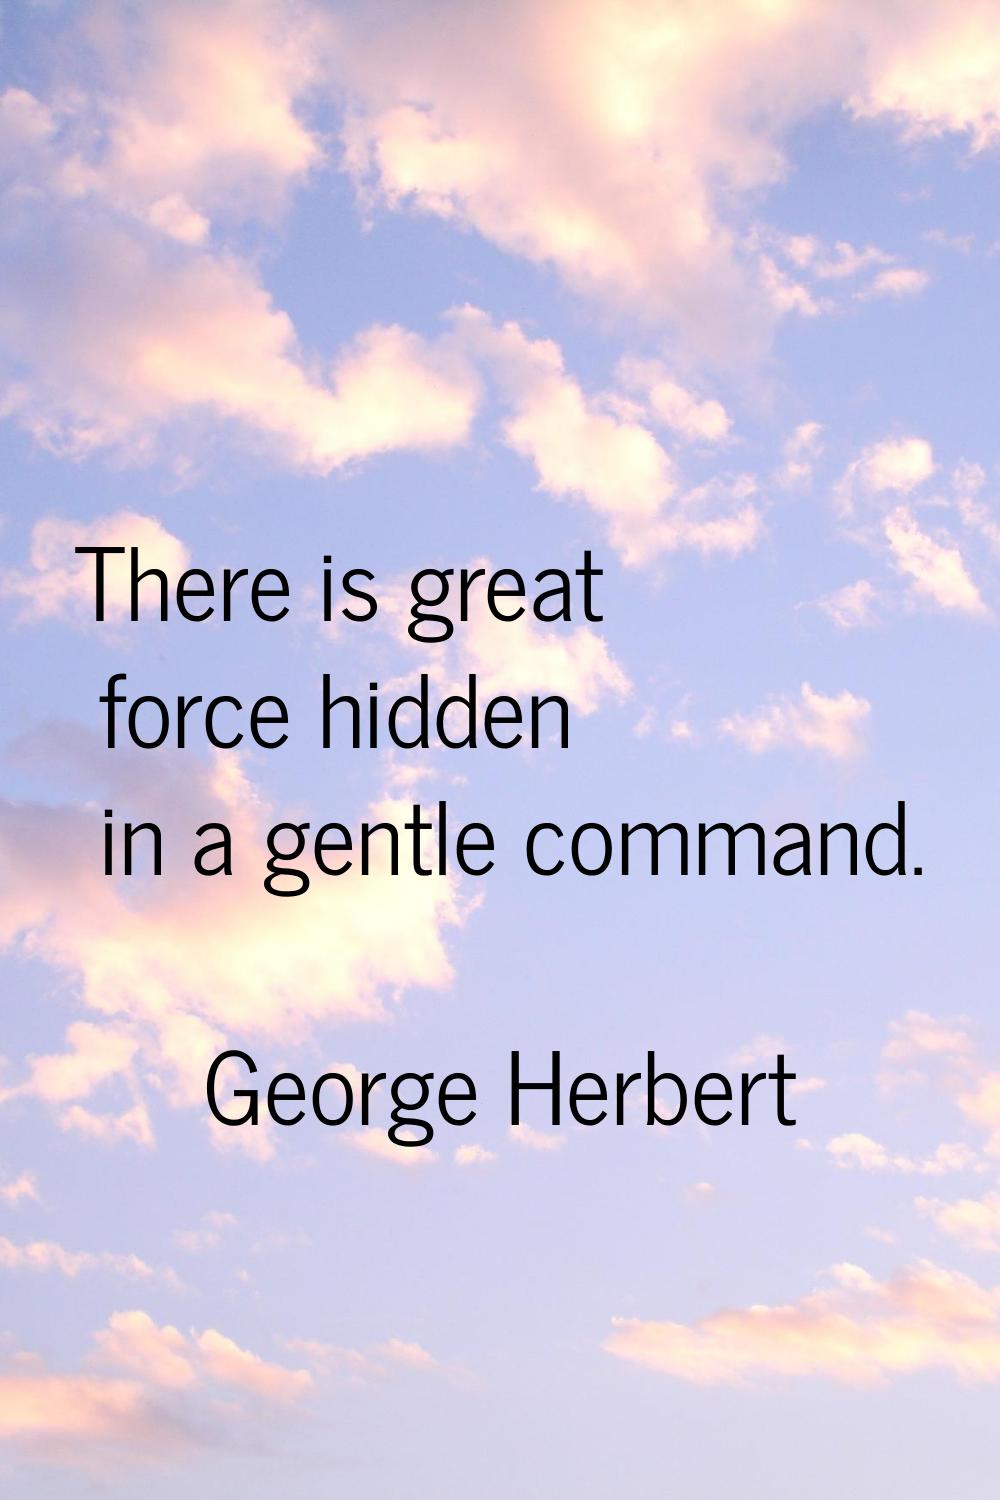 There is great force hidden in a gentle command.